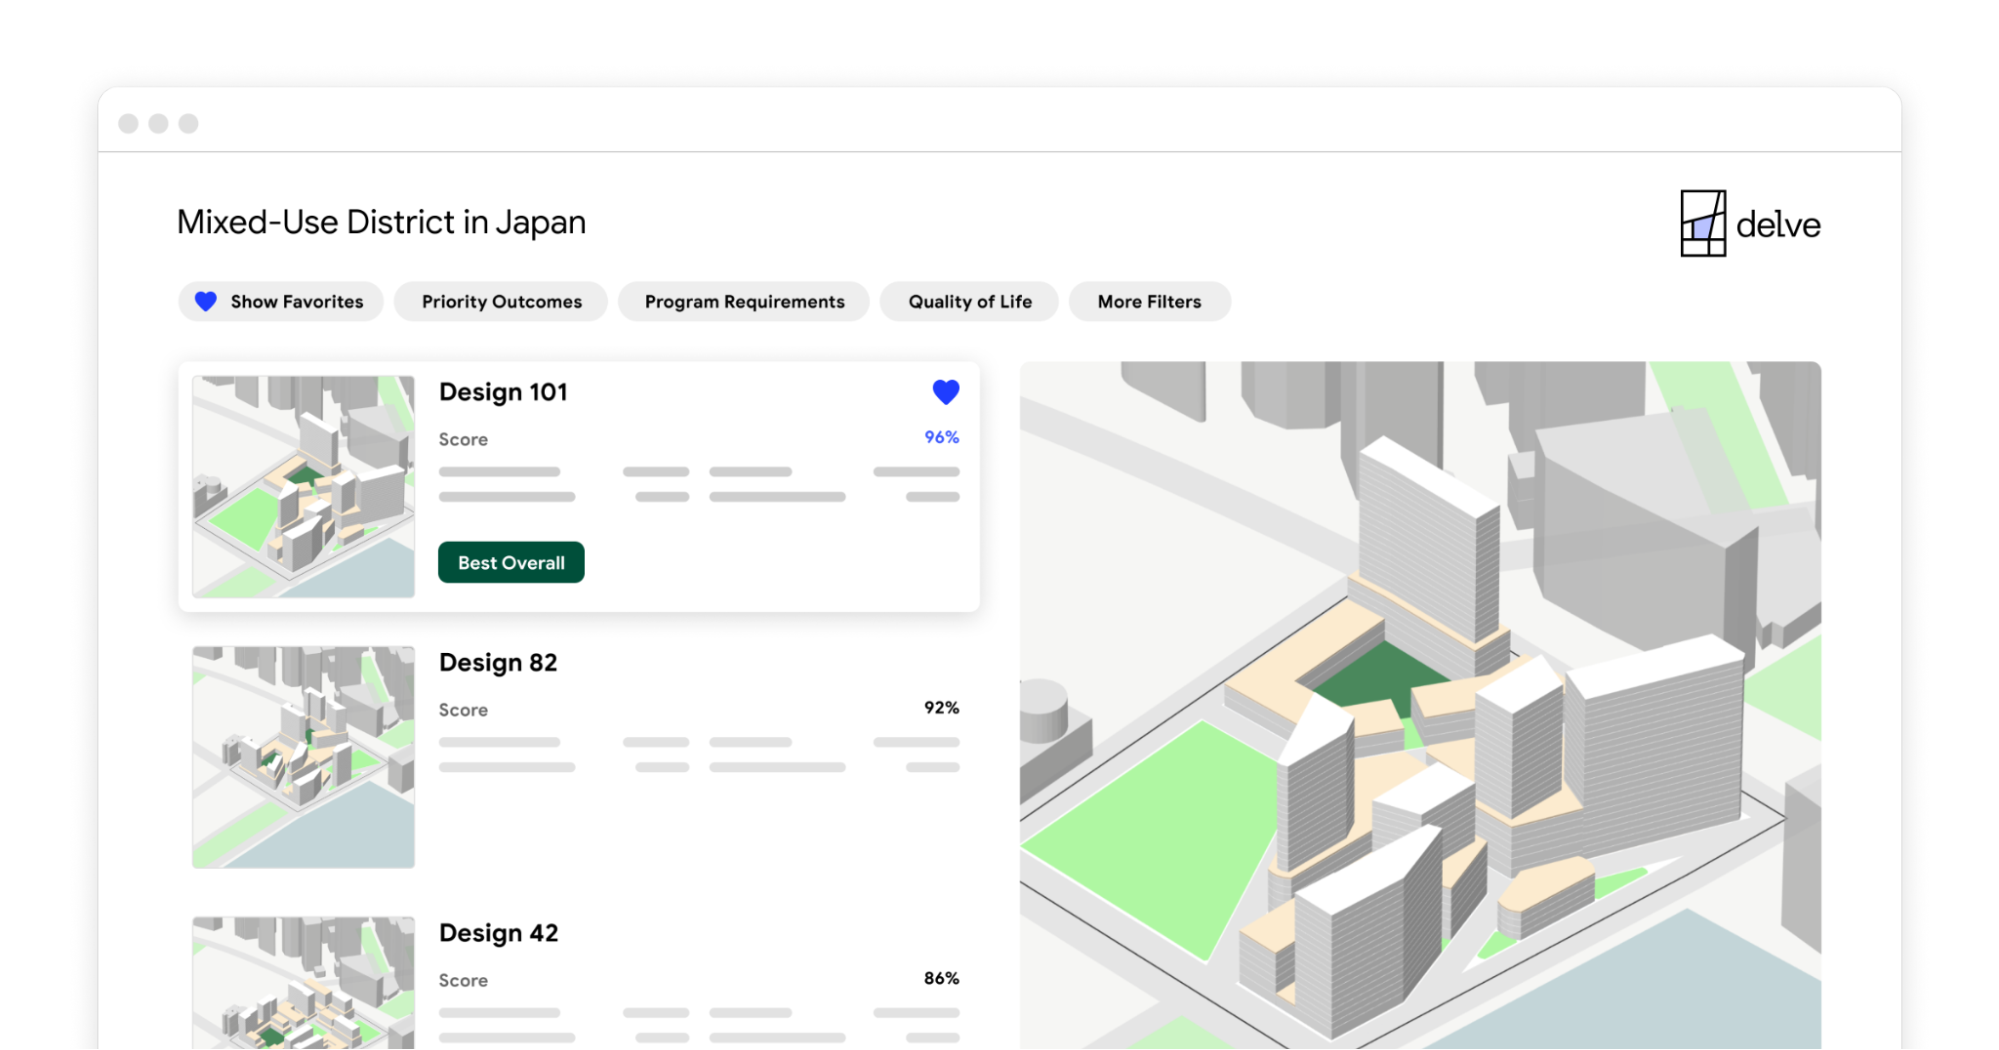 Screenshot shows multiple urban planning layouts for a mixed-use district in Japan.